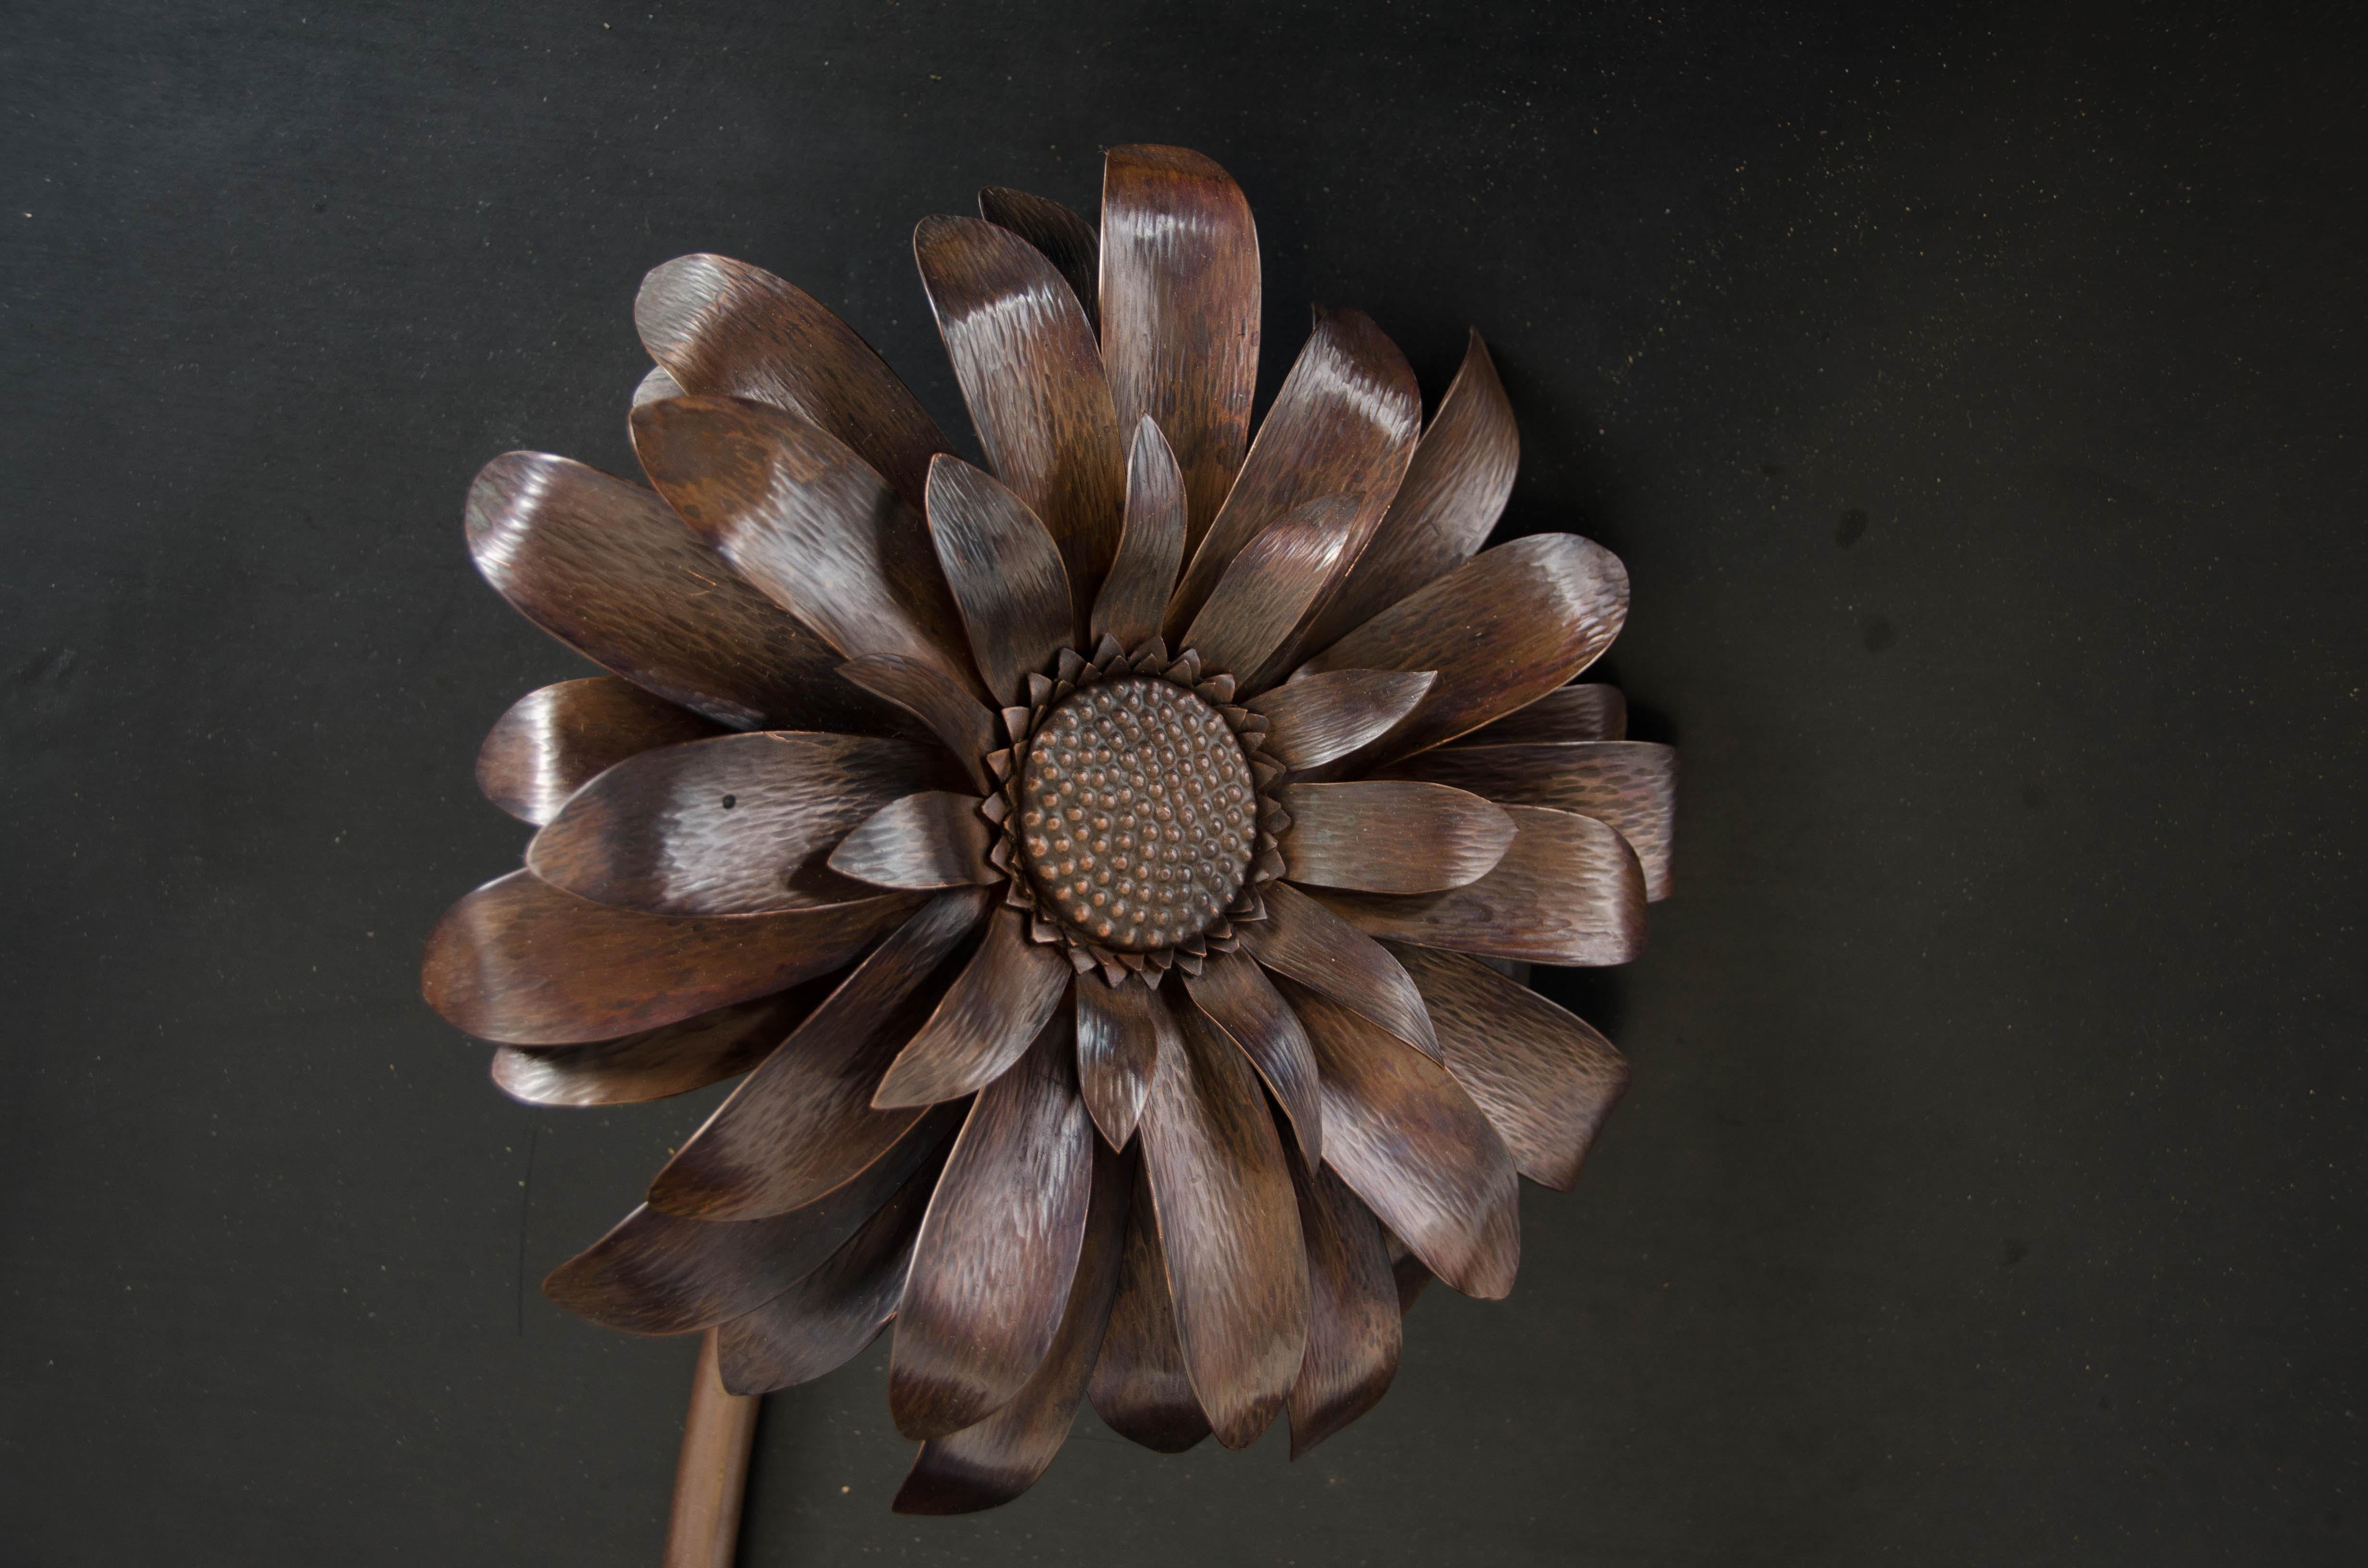 Mid-Century Modern Gerber Daisy Flower Sculpture, Antique Copper by Robert Kuo, Hand Repousse For Sale